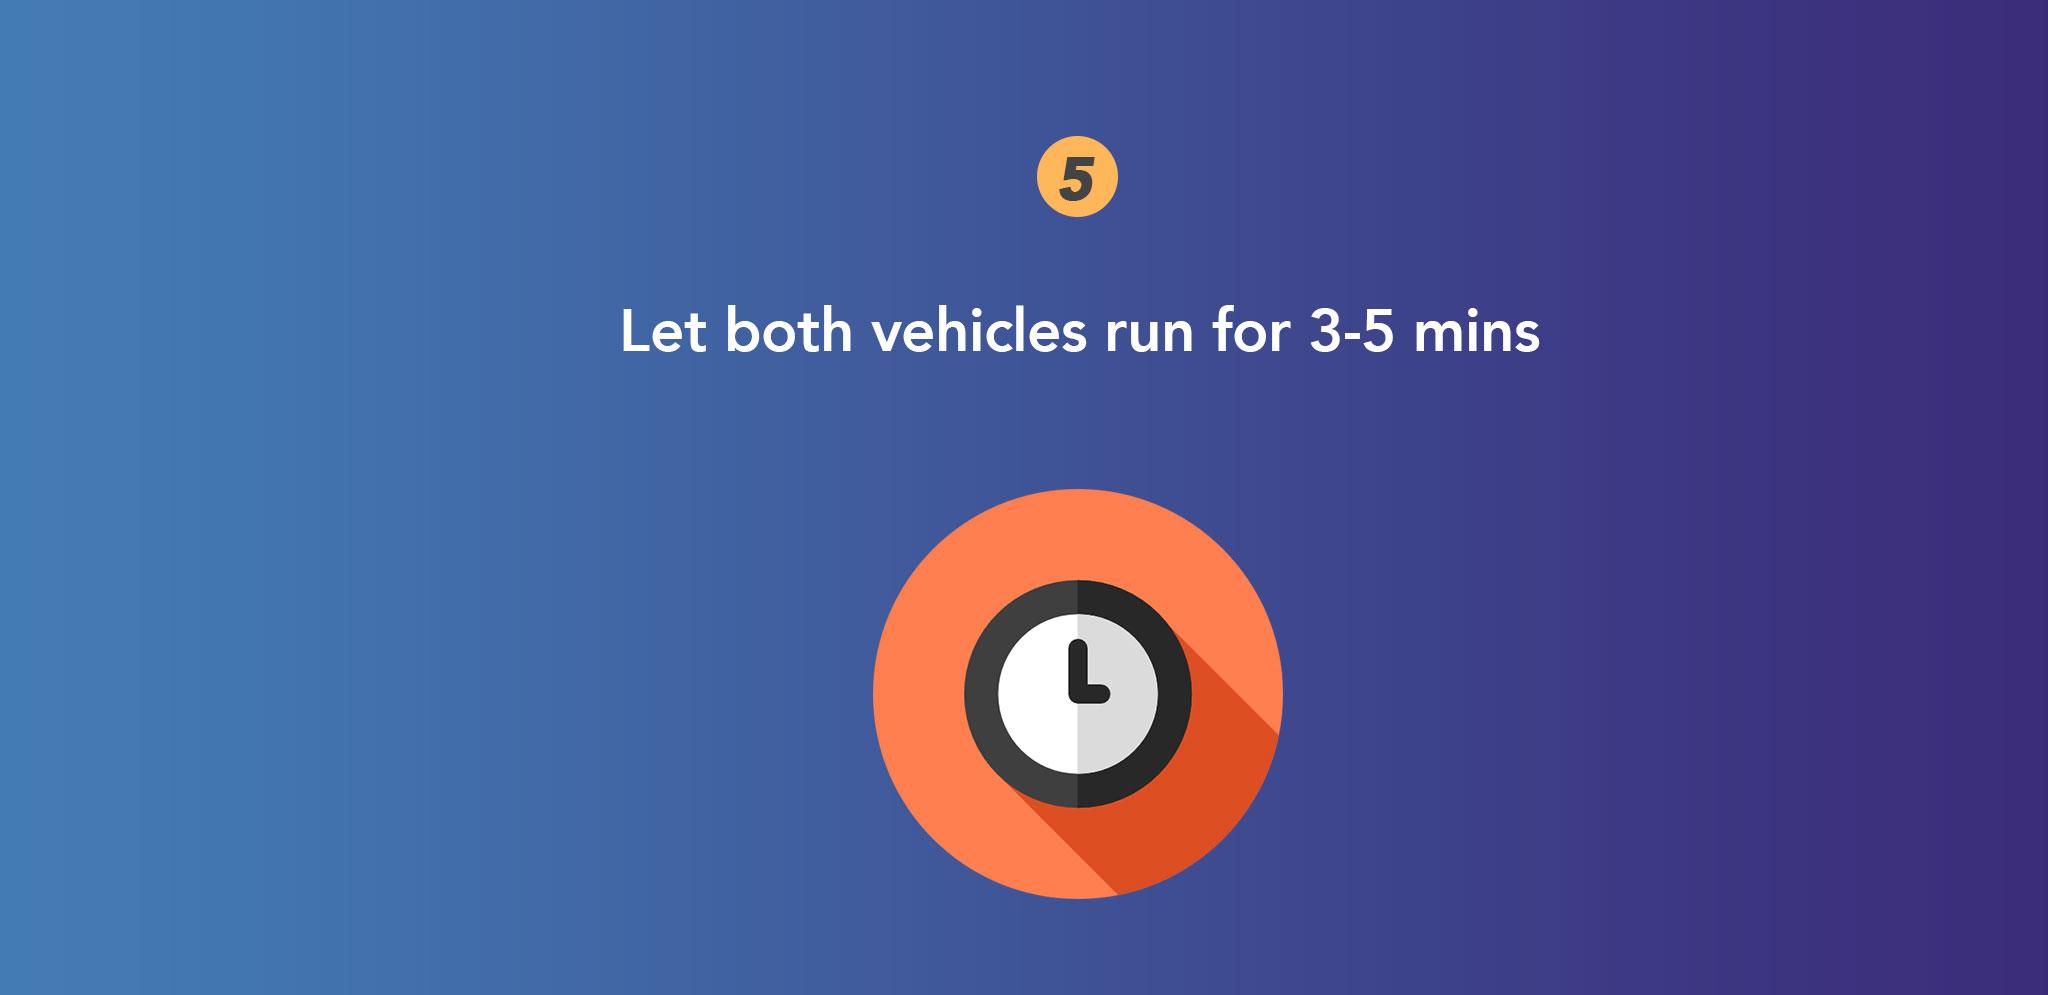 Let both vehicles run for 3-5 mins